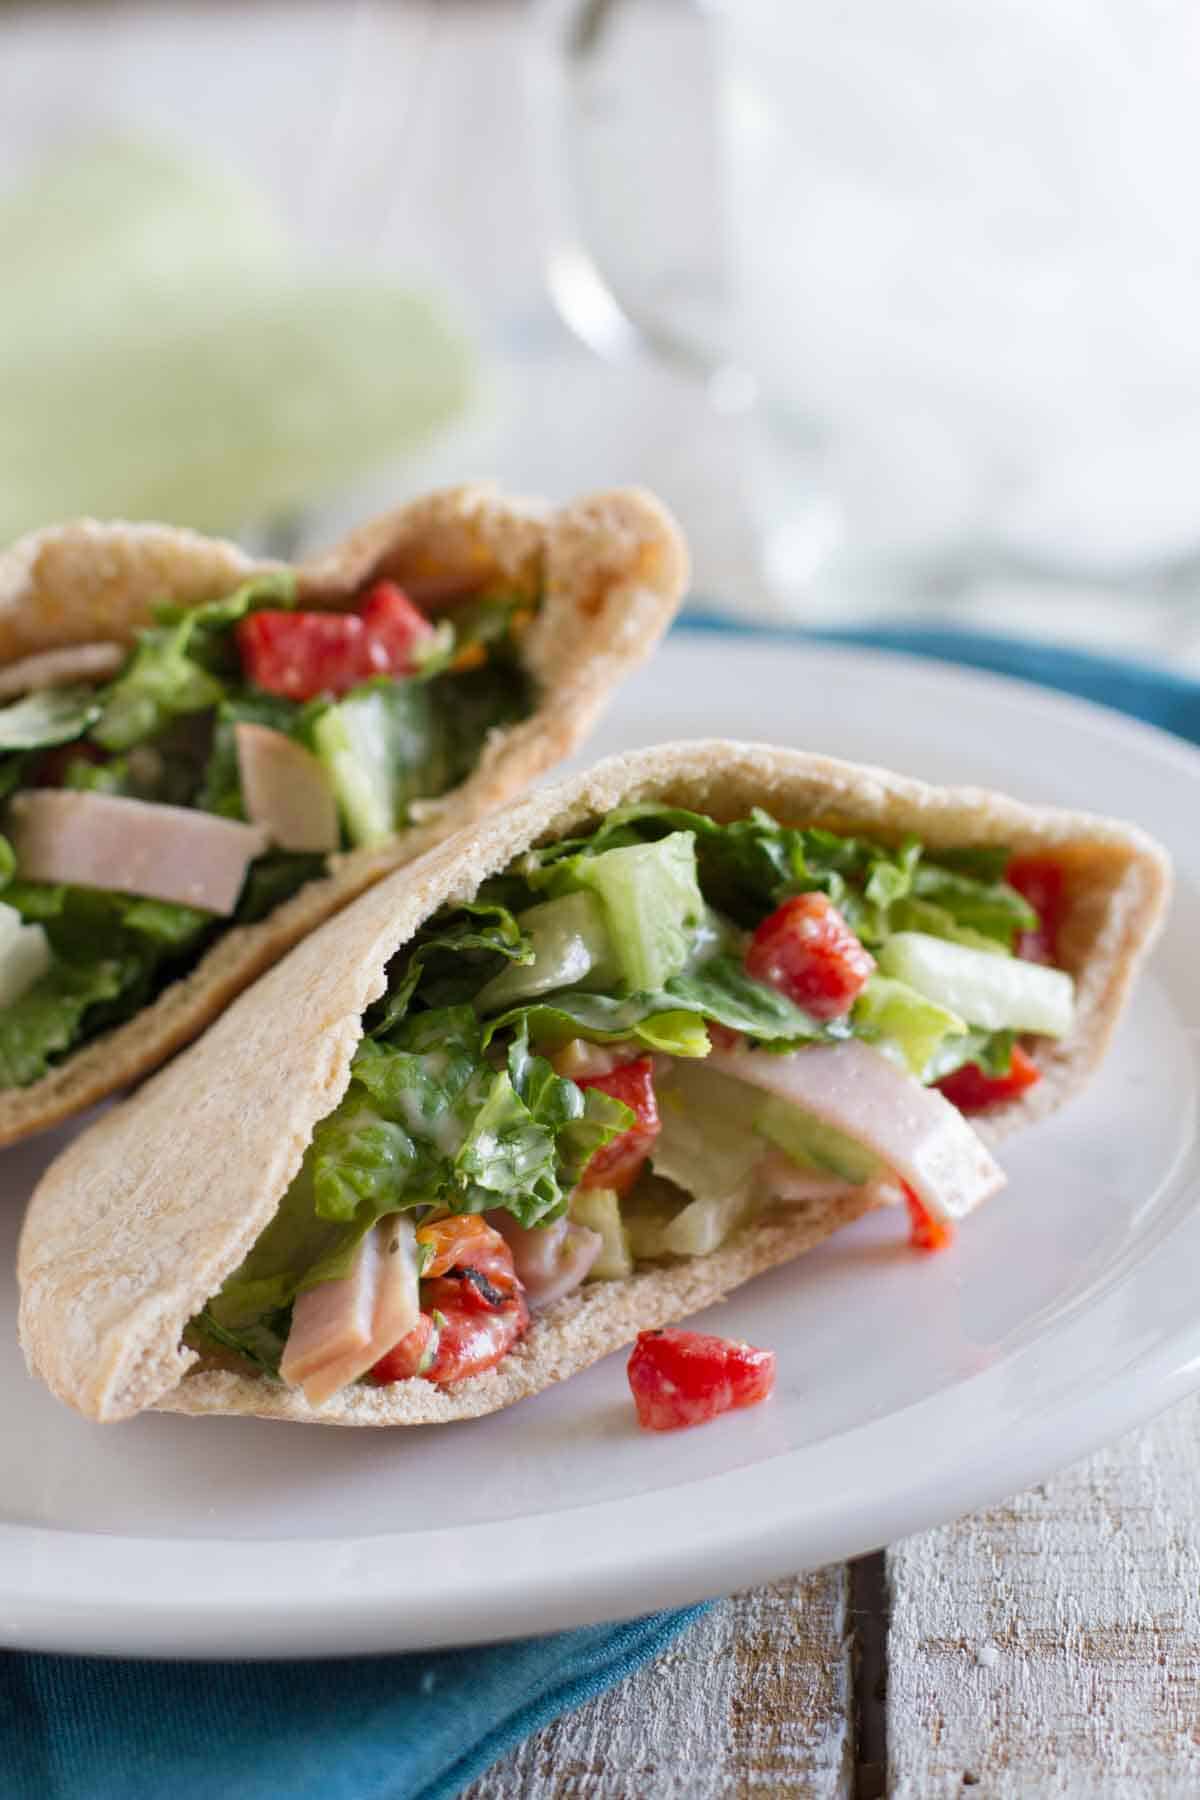 pita sandwich with turkey, lettuce and roasted red peppers